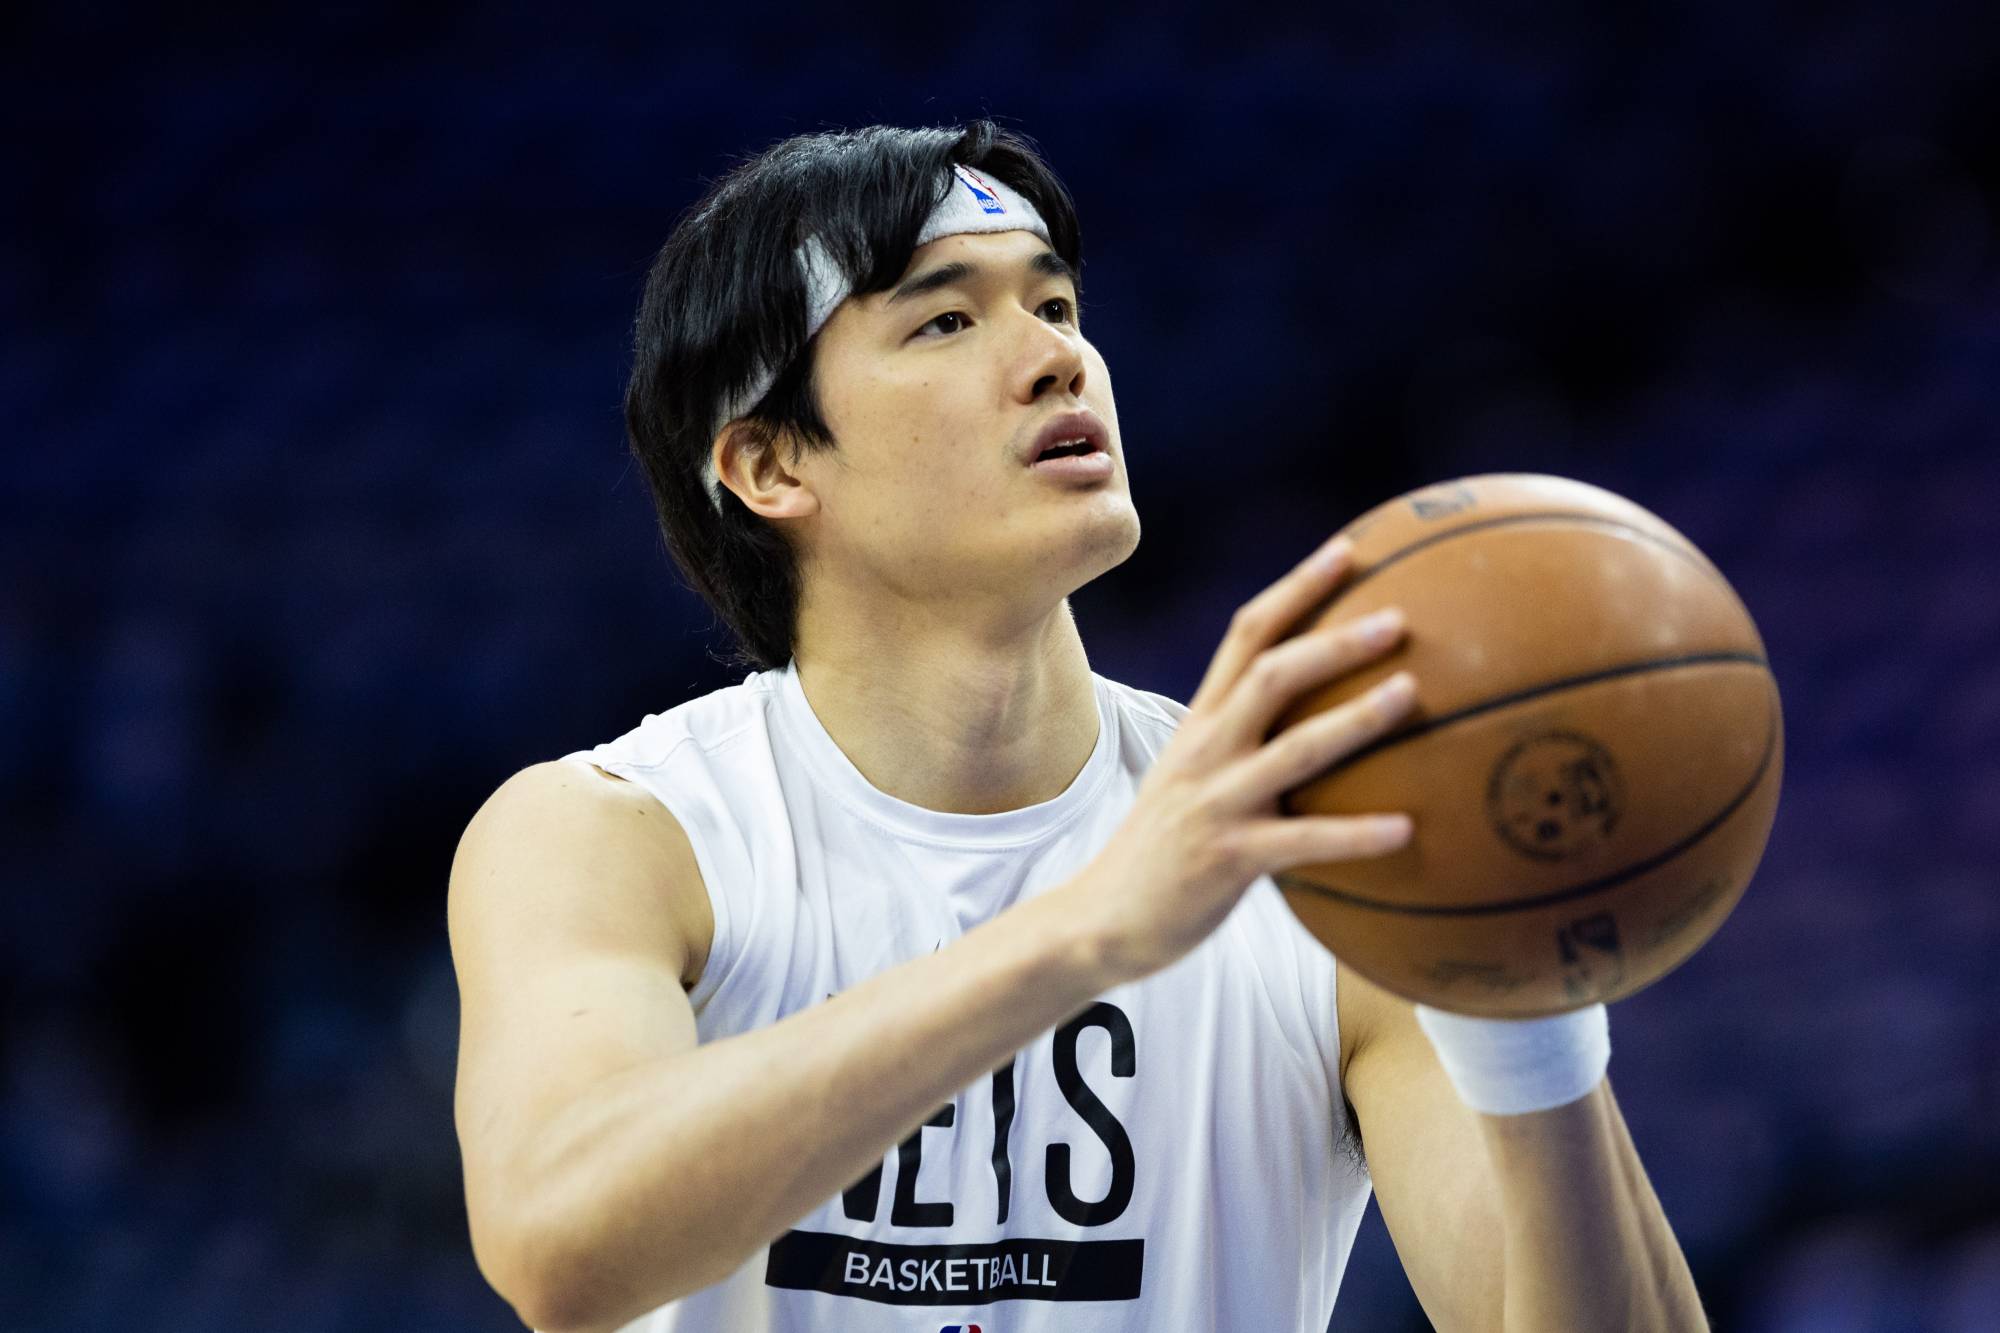 Yuta Watanabe averaged 5.6 points per game last season playing 58 games for the Brooklyn Nets. | USA TODAY / VIA REUTERS